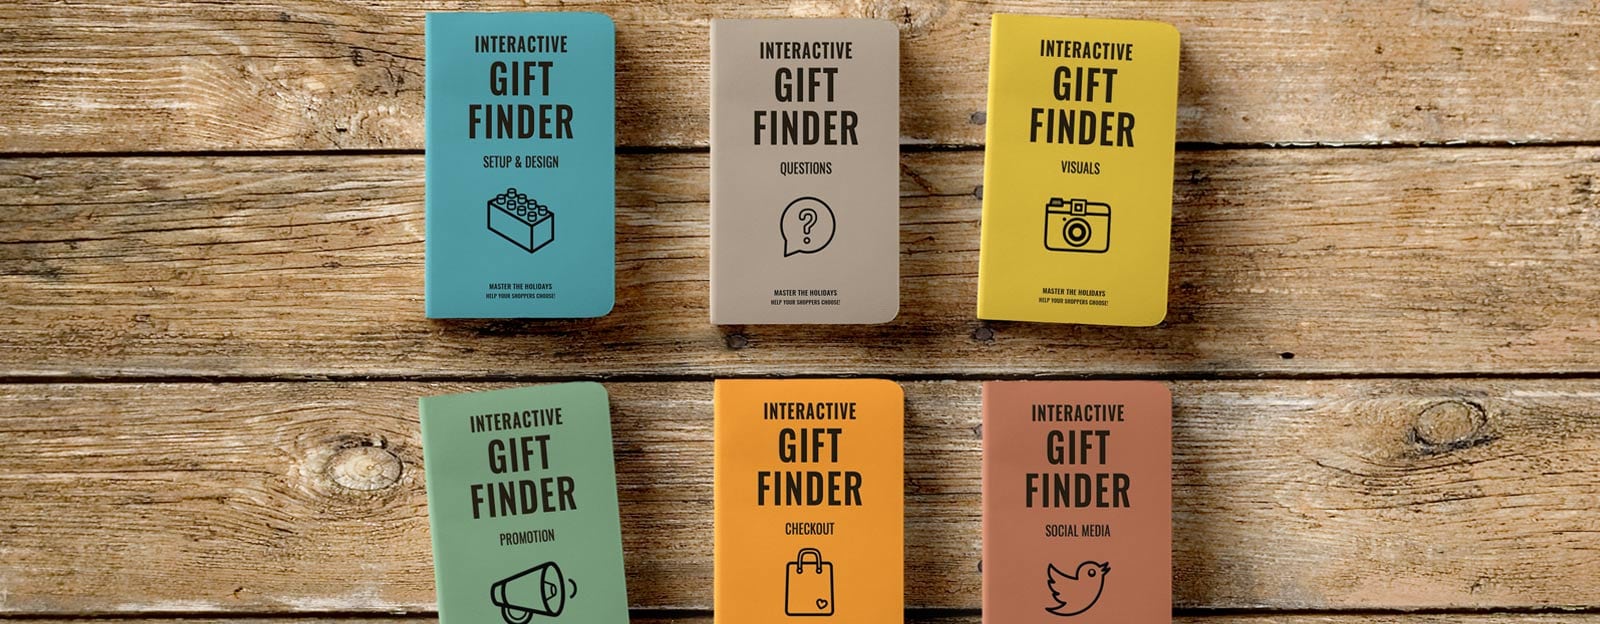 How to Create a Great Interactive Gift Finder – Best Practices